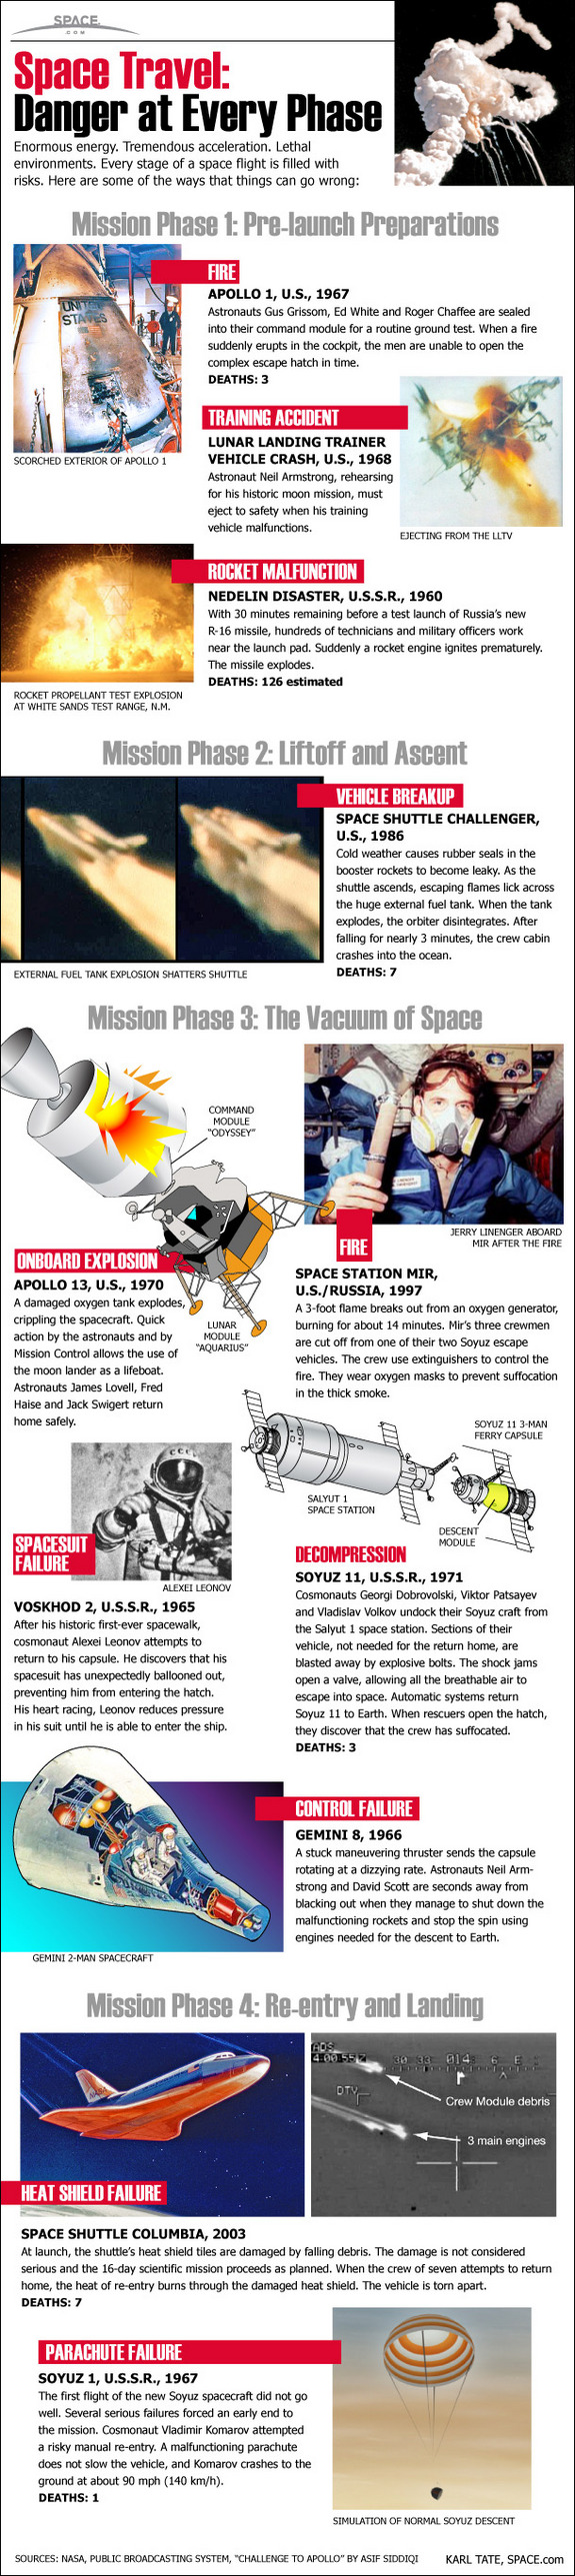 Space is a dangerous place for humans. Learn about the perils of human spaceflight.